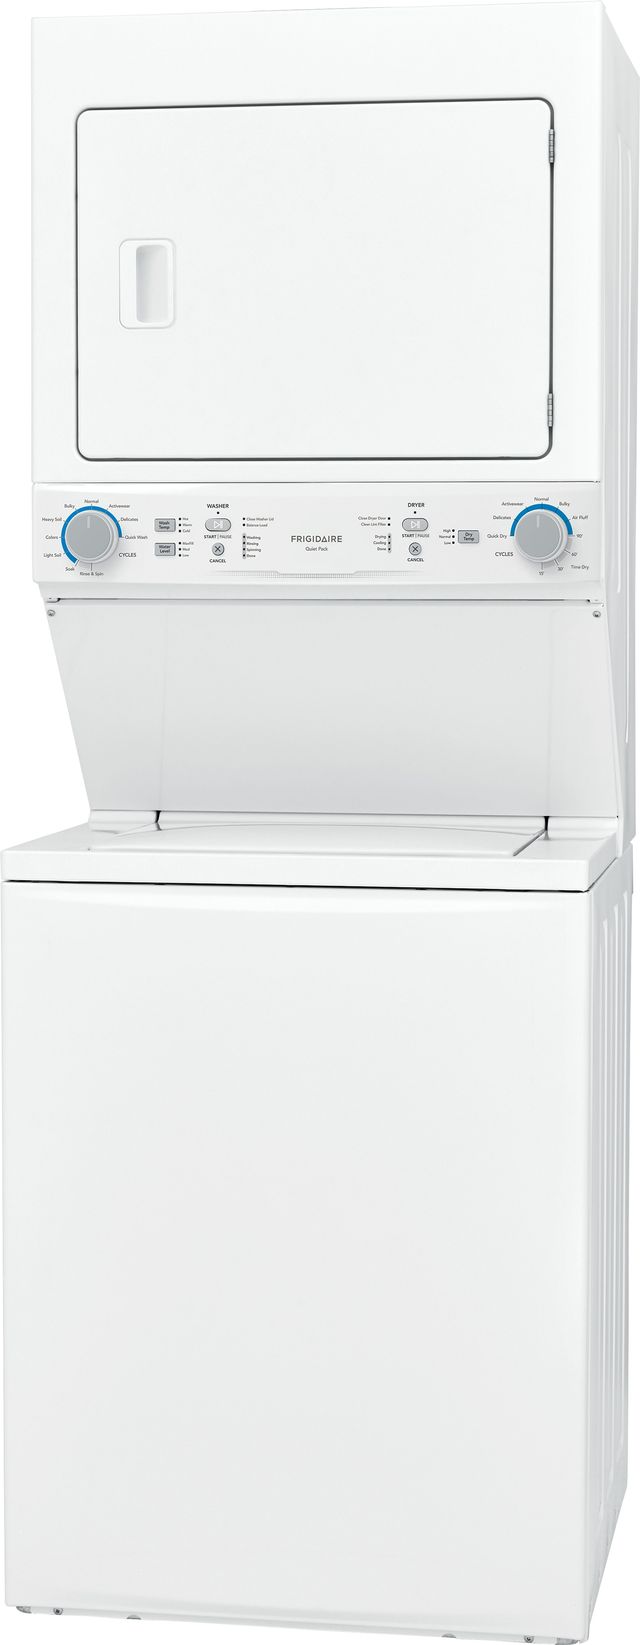 Frigidaire® 3.9 Cu. Ft. Washer, 5.6 Cu. Ft. Dryer White Electric Stack Laundry 13